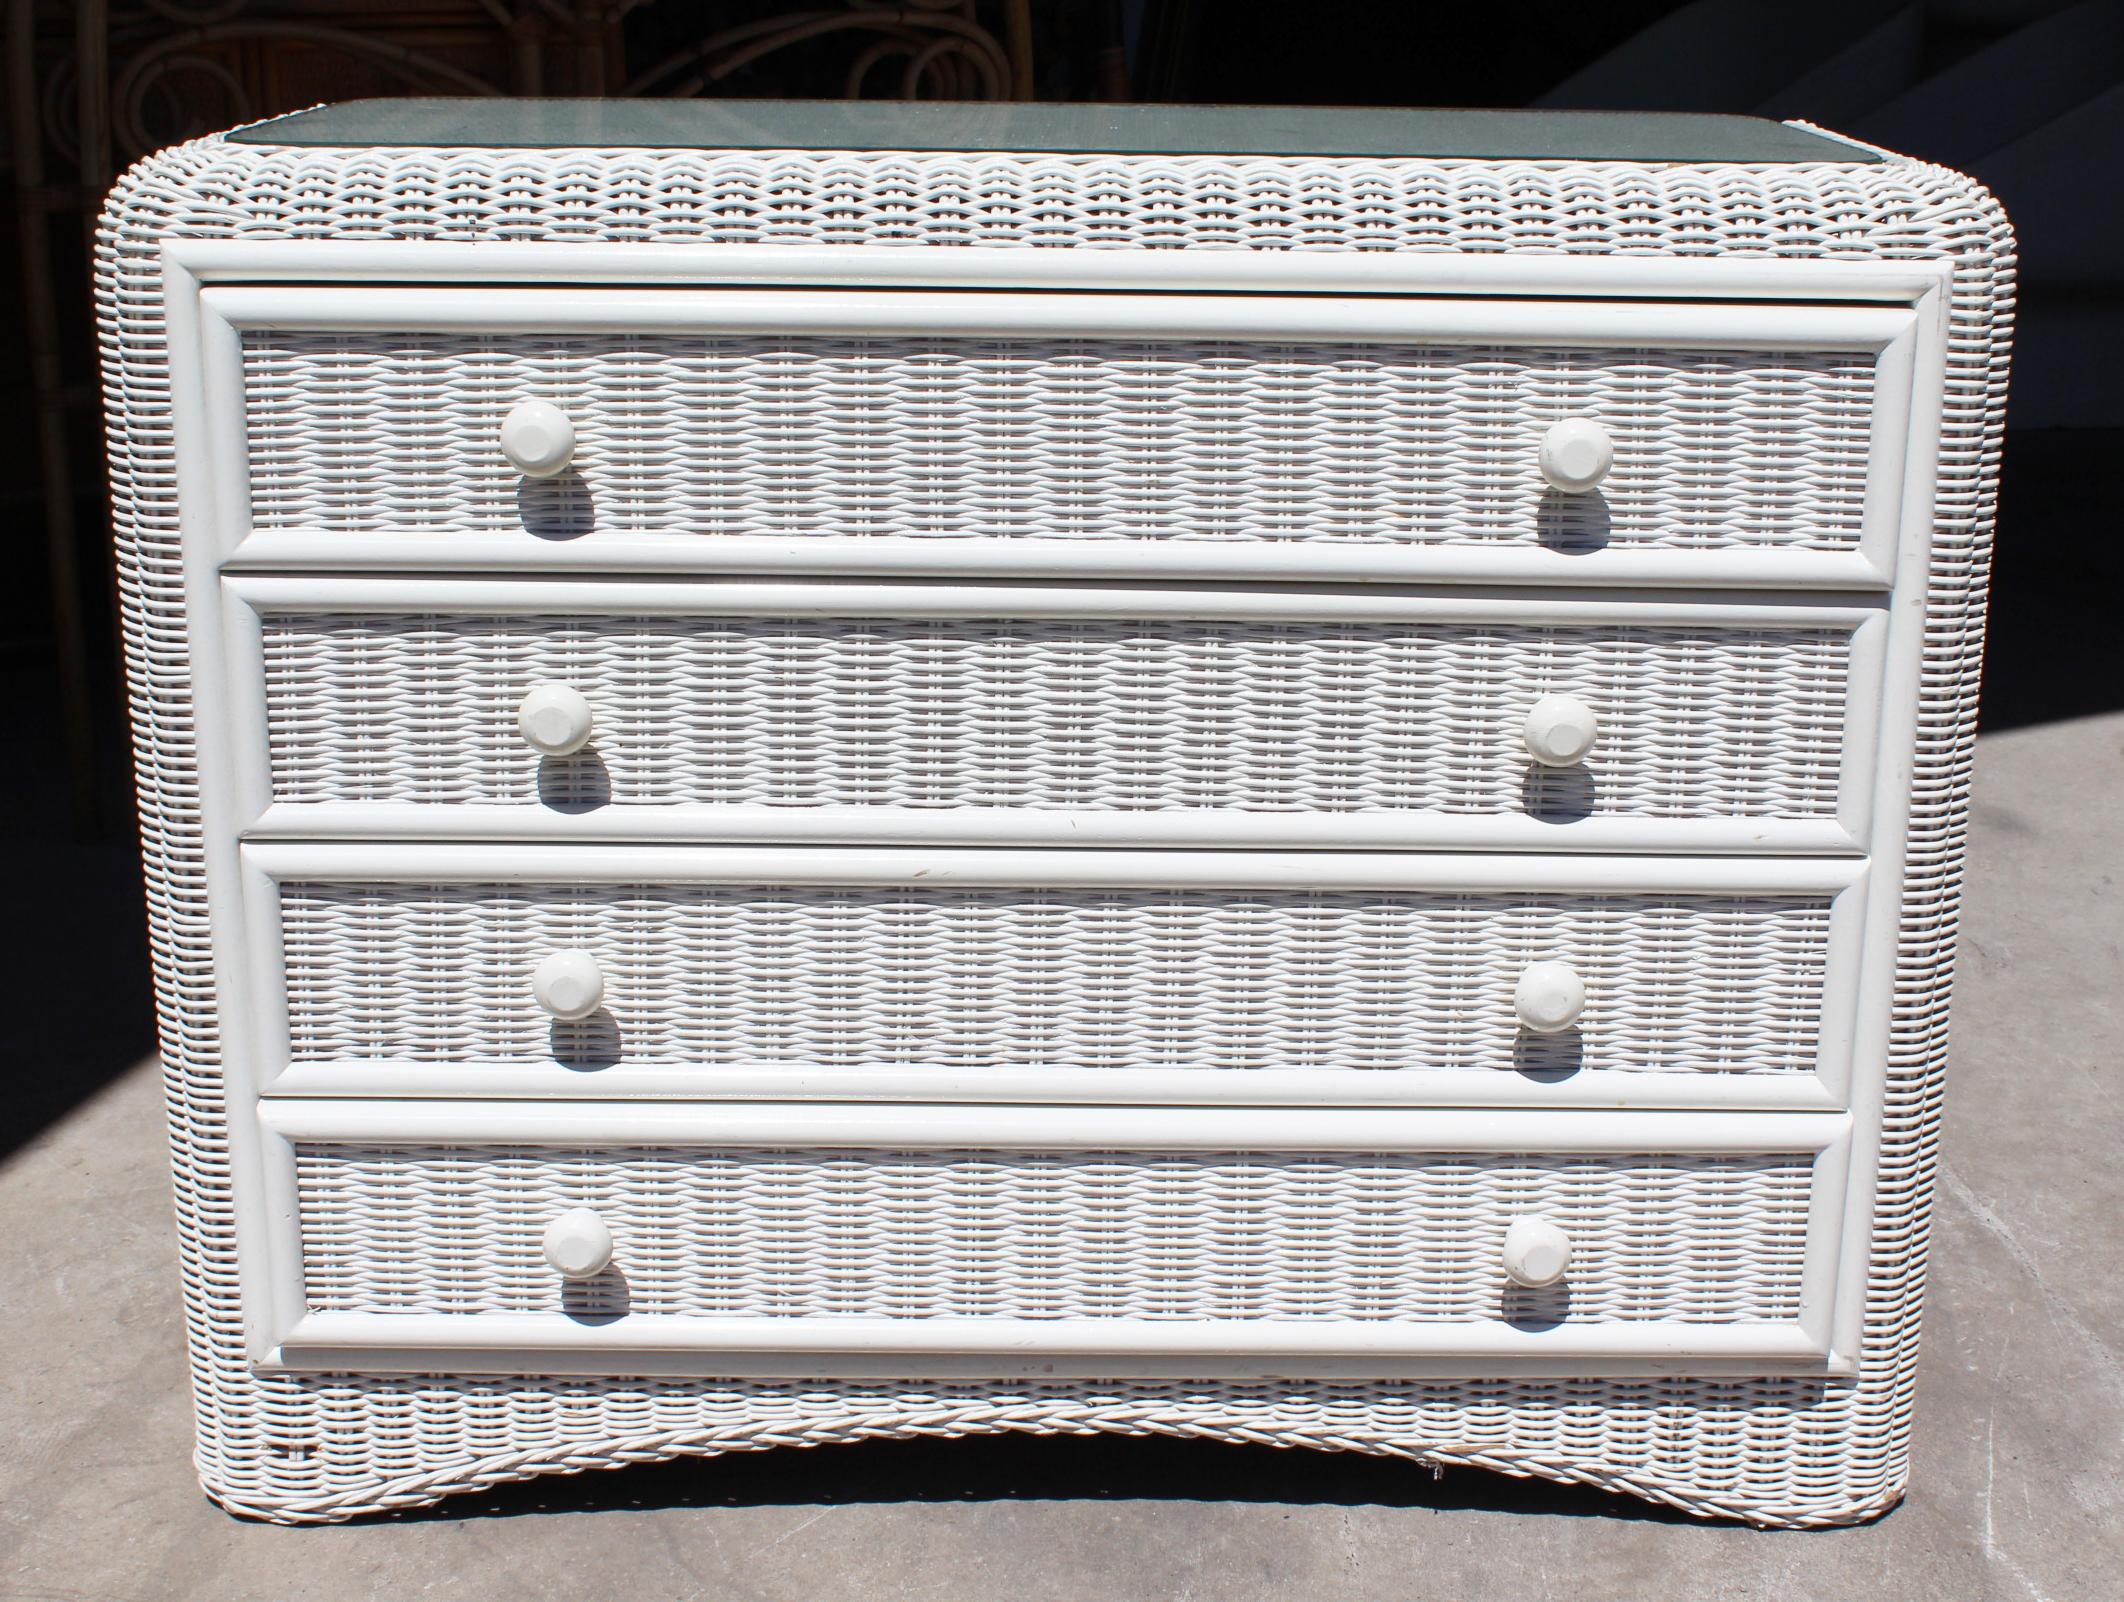 1970s white Spanish wicker and wood dresser with four drawers.